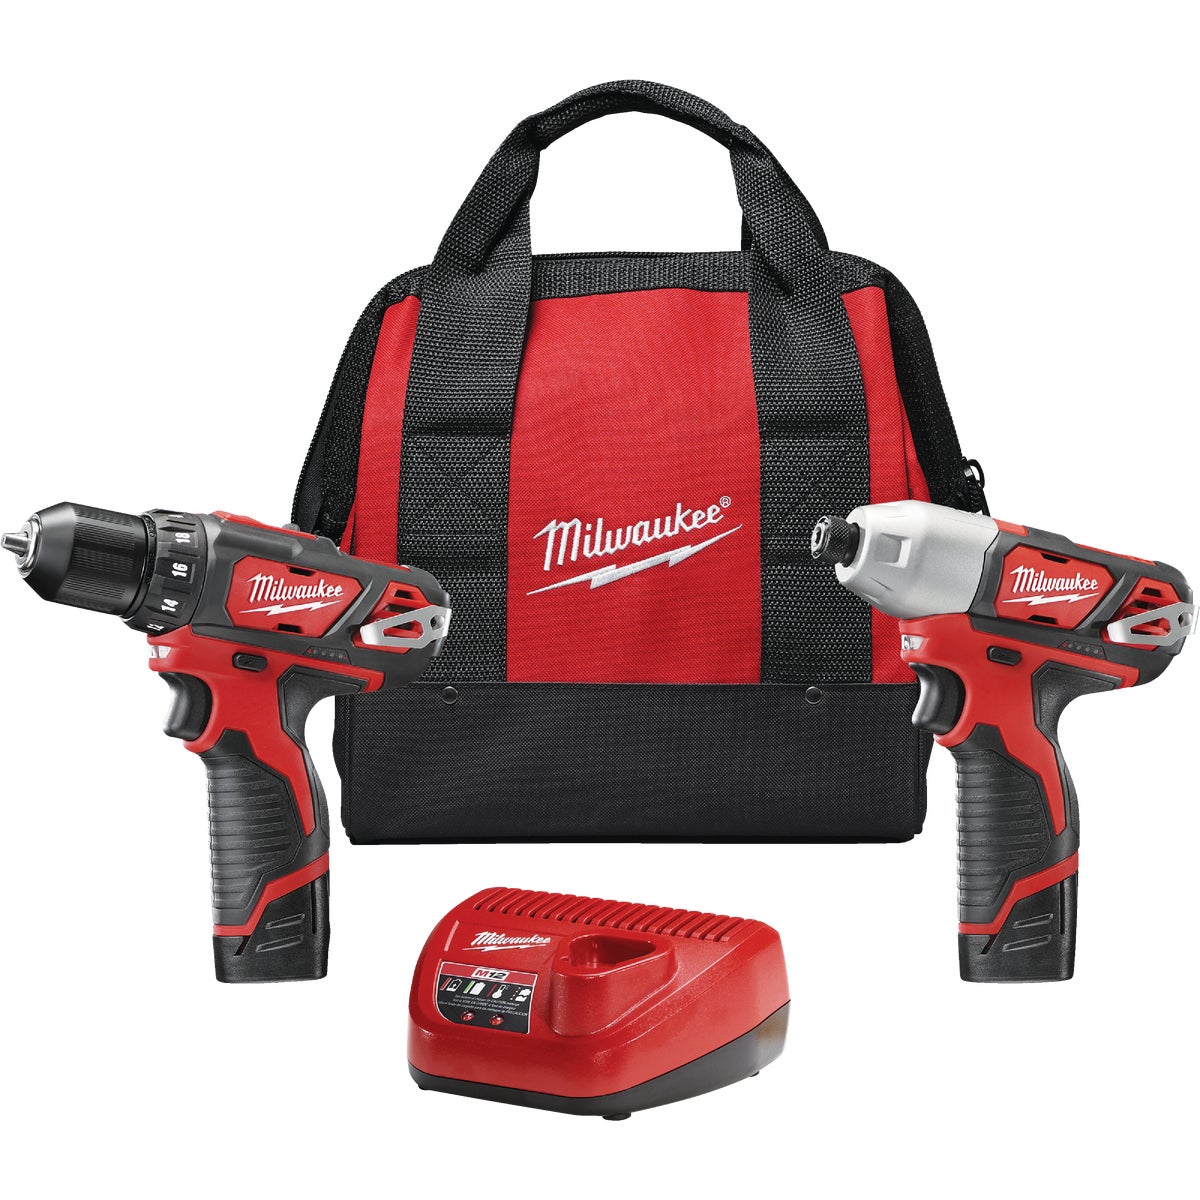 Milwaukee 2-Tool M12 12V Lithium-Ion Drill/Driver & Impact Driver Cordless Tool Combo Kit